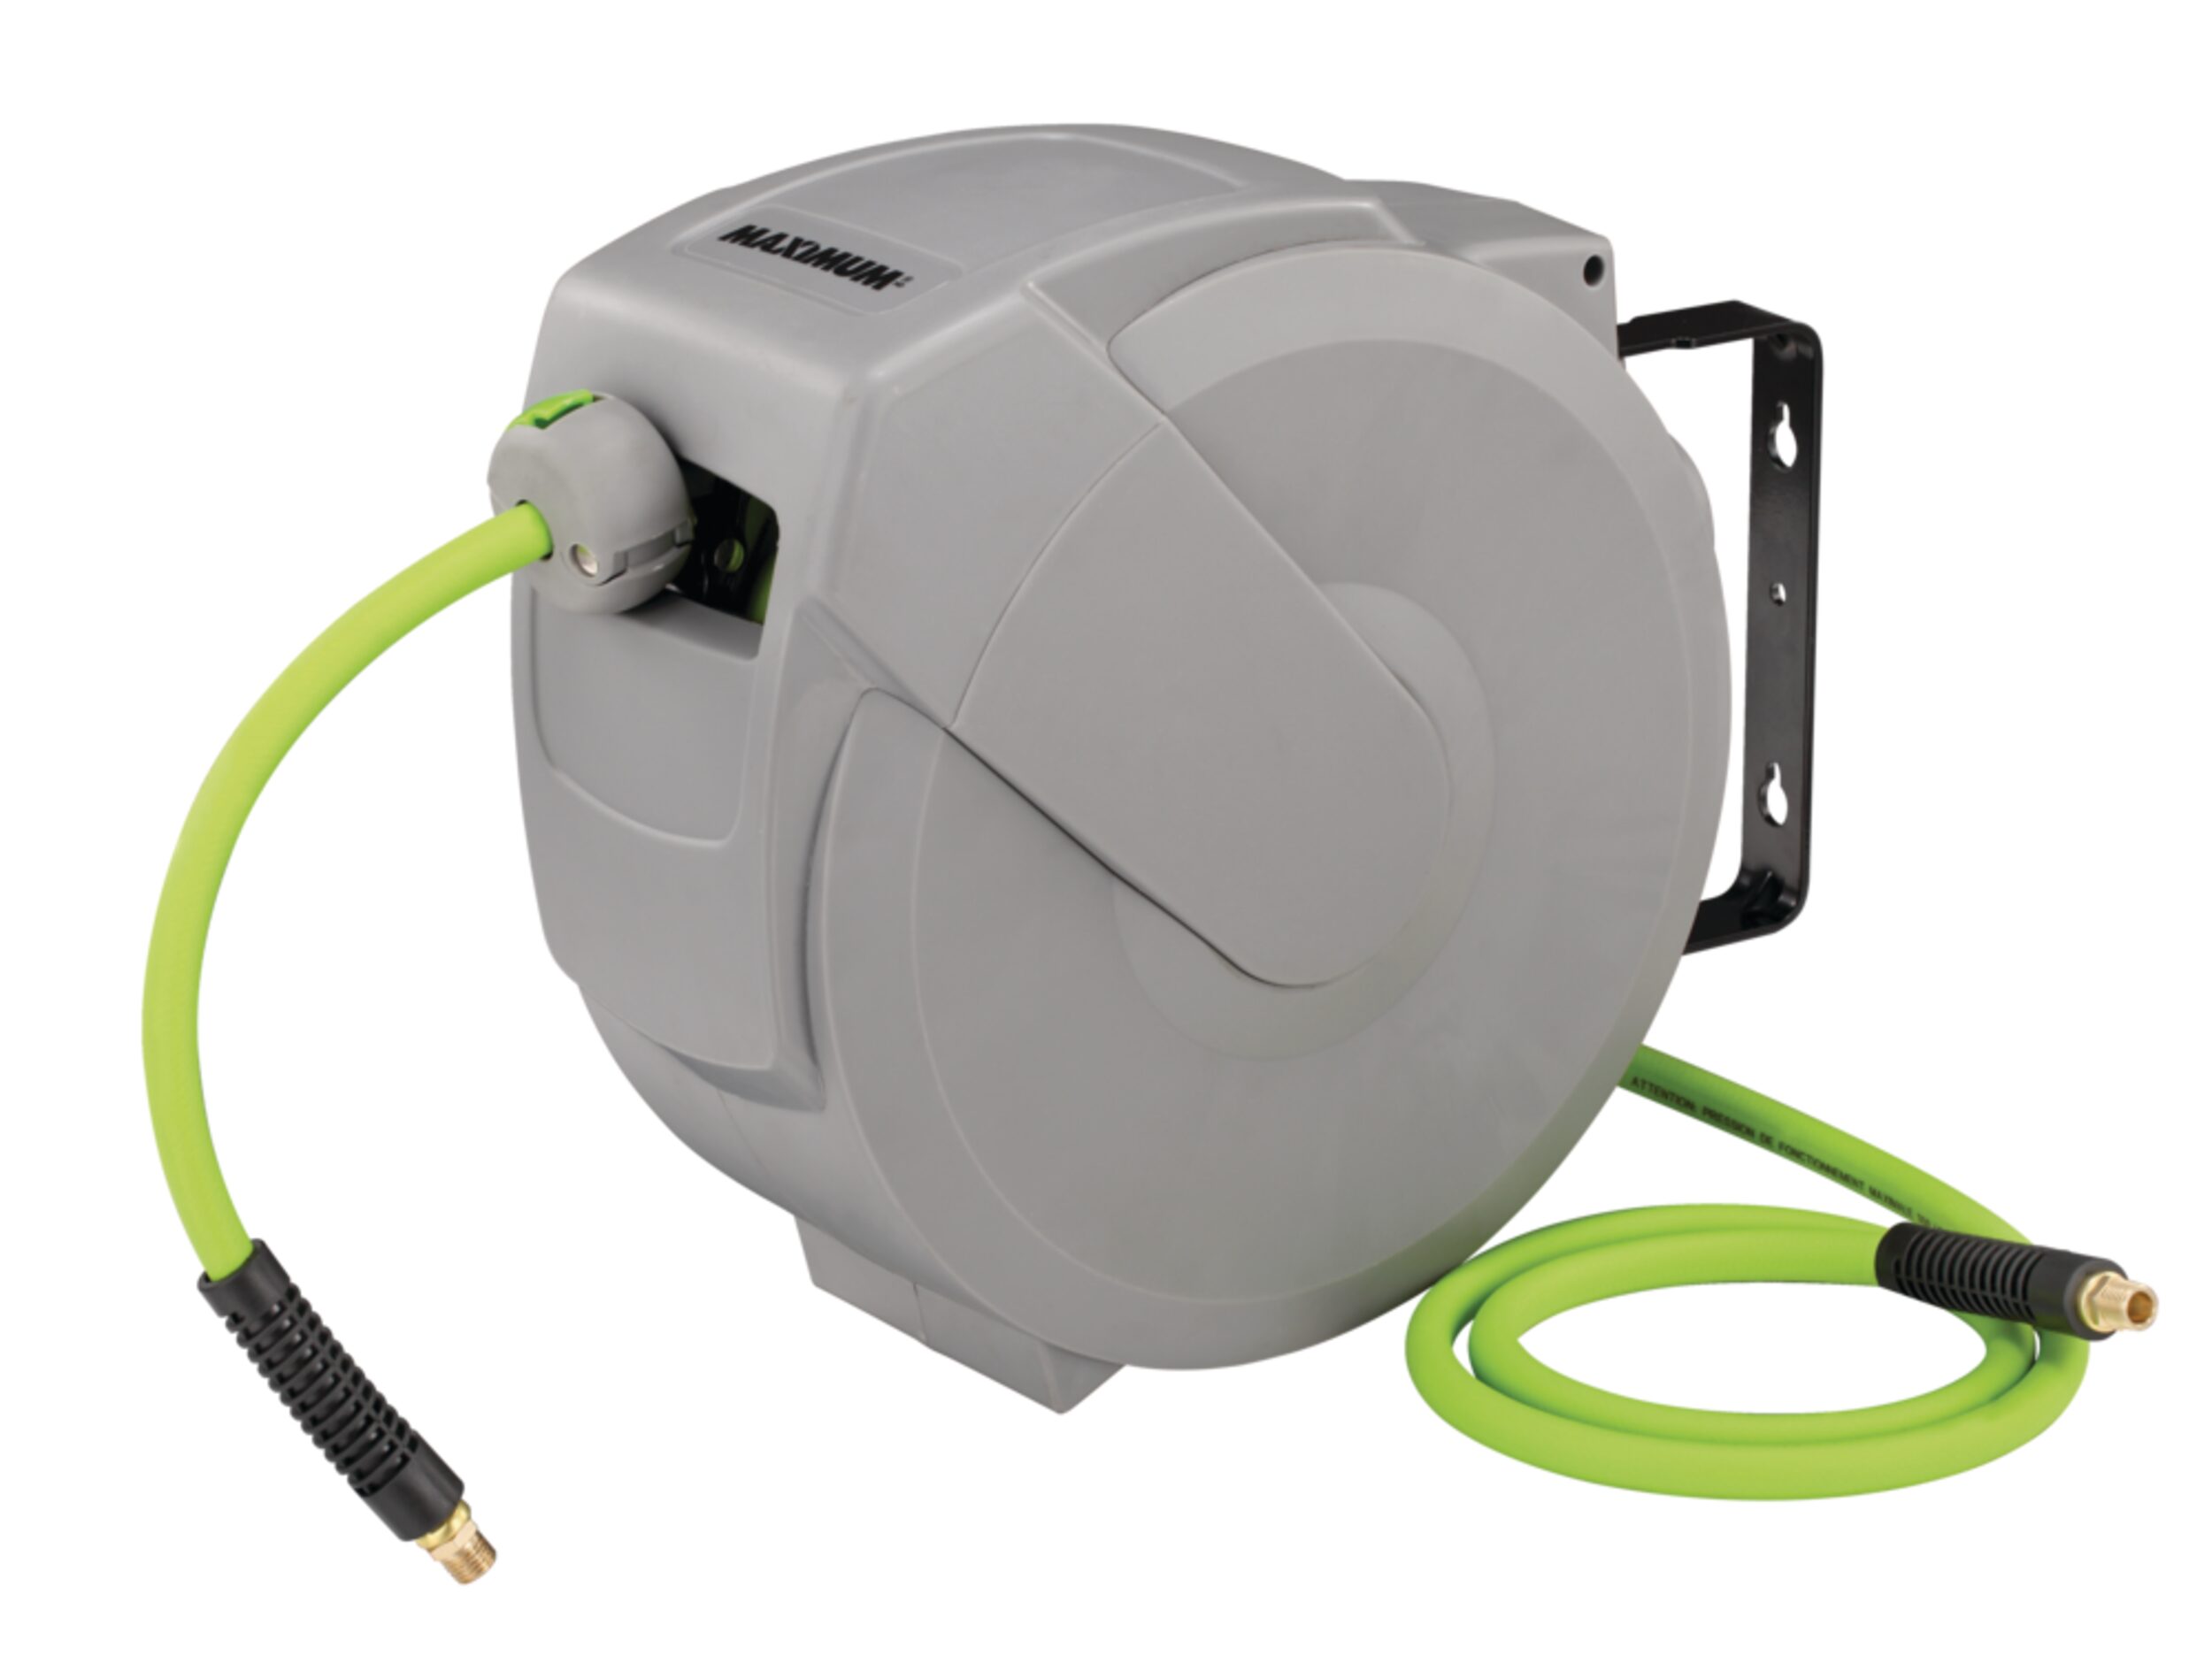 Canadian Tire] MAXIMUM Air Hose Reel with Hybrid Hose, 50-ft